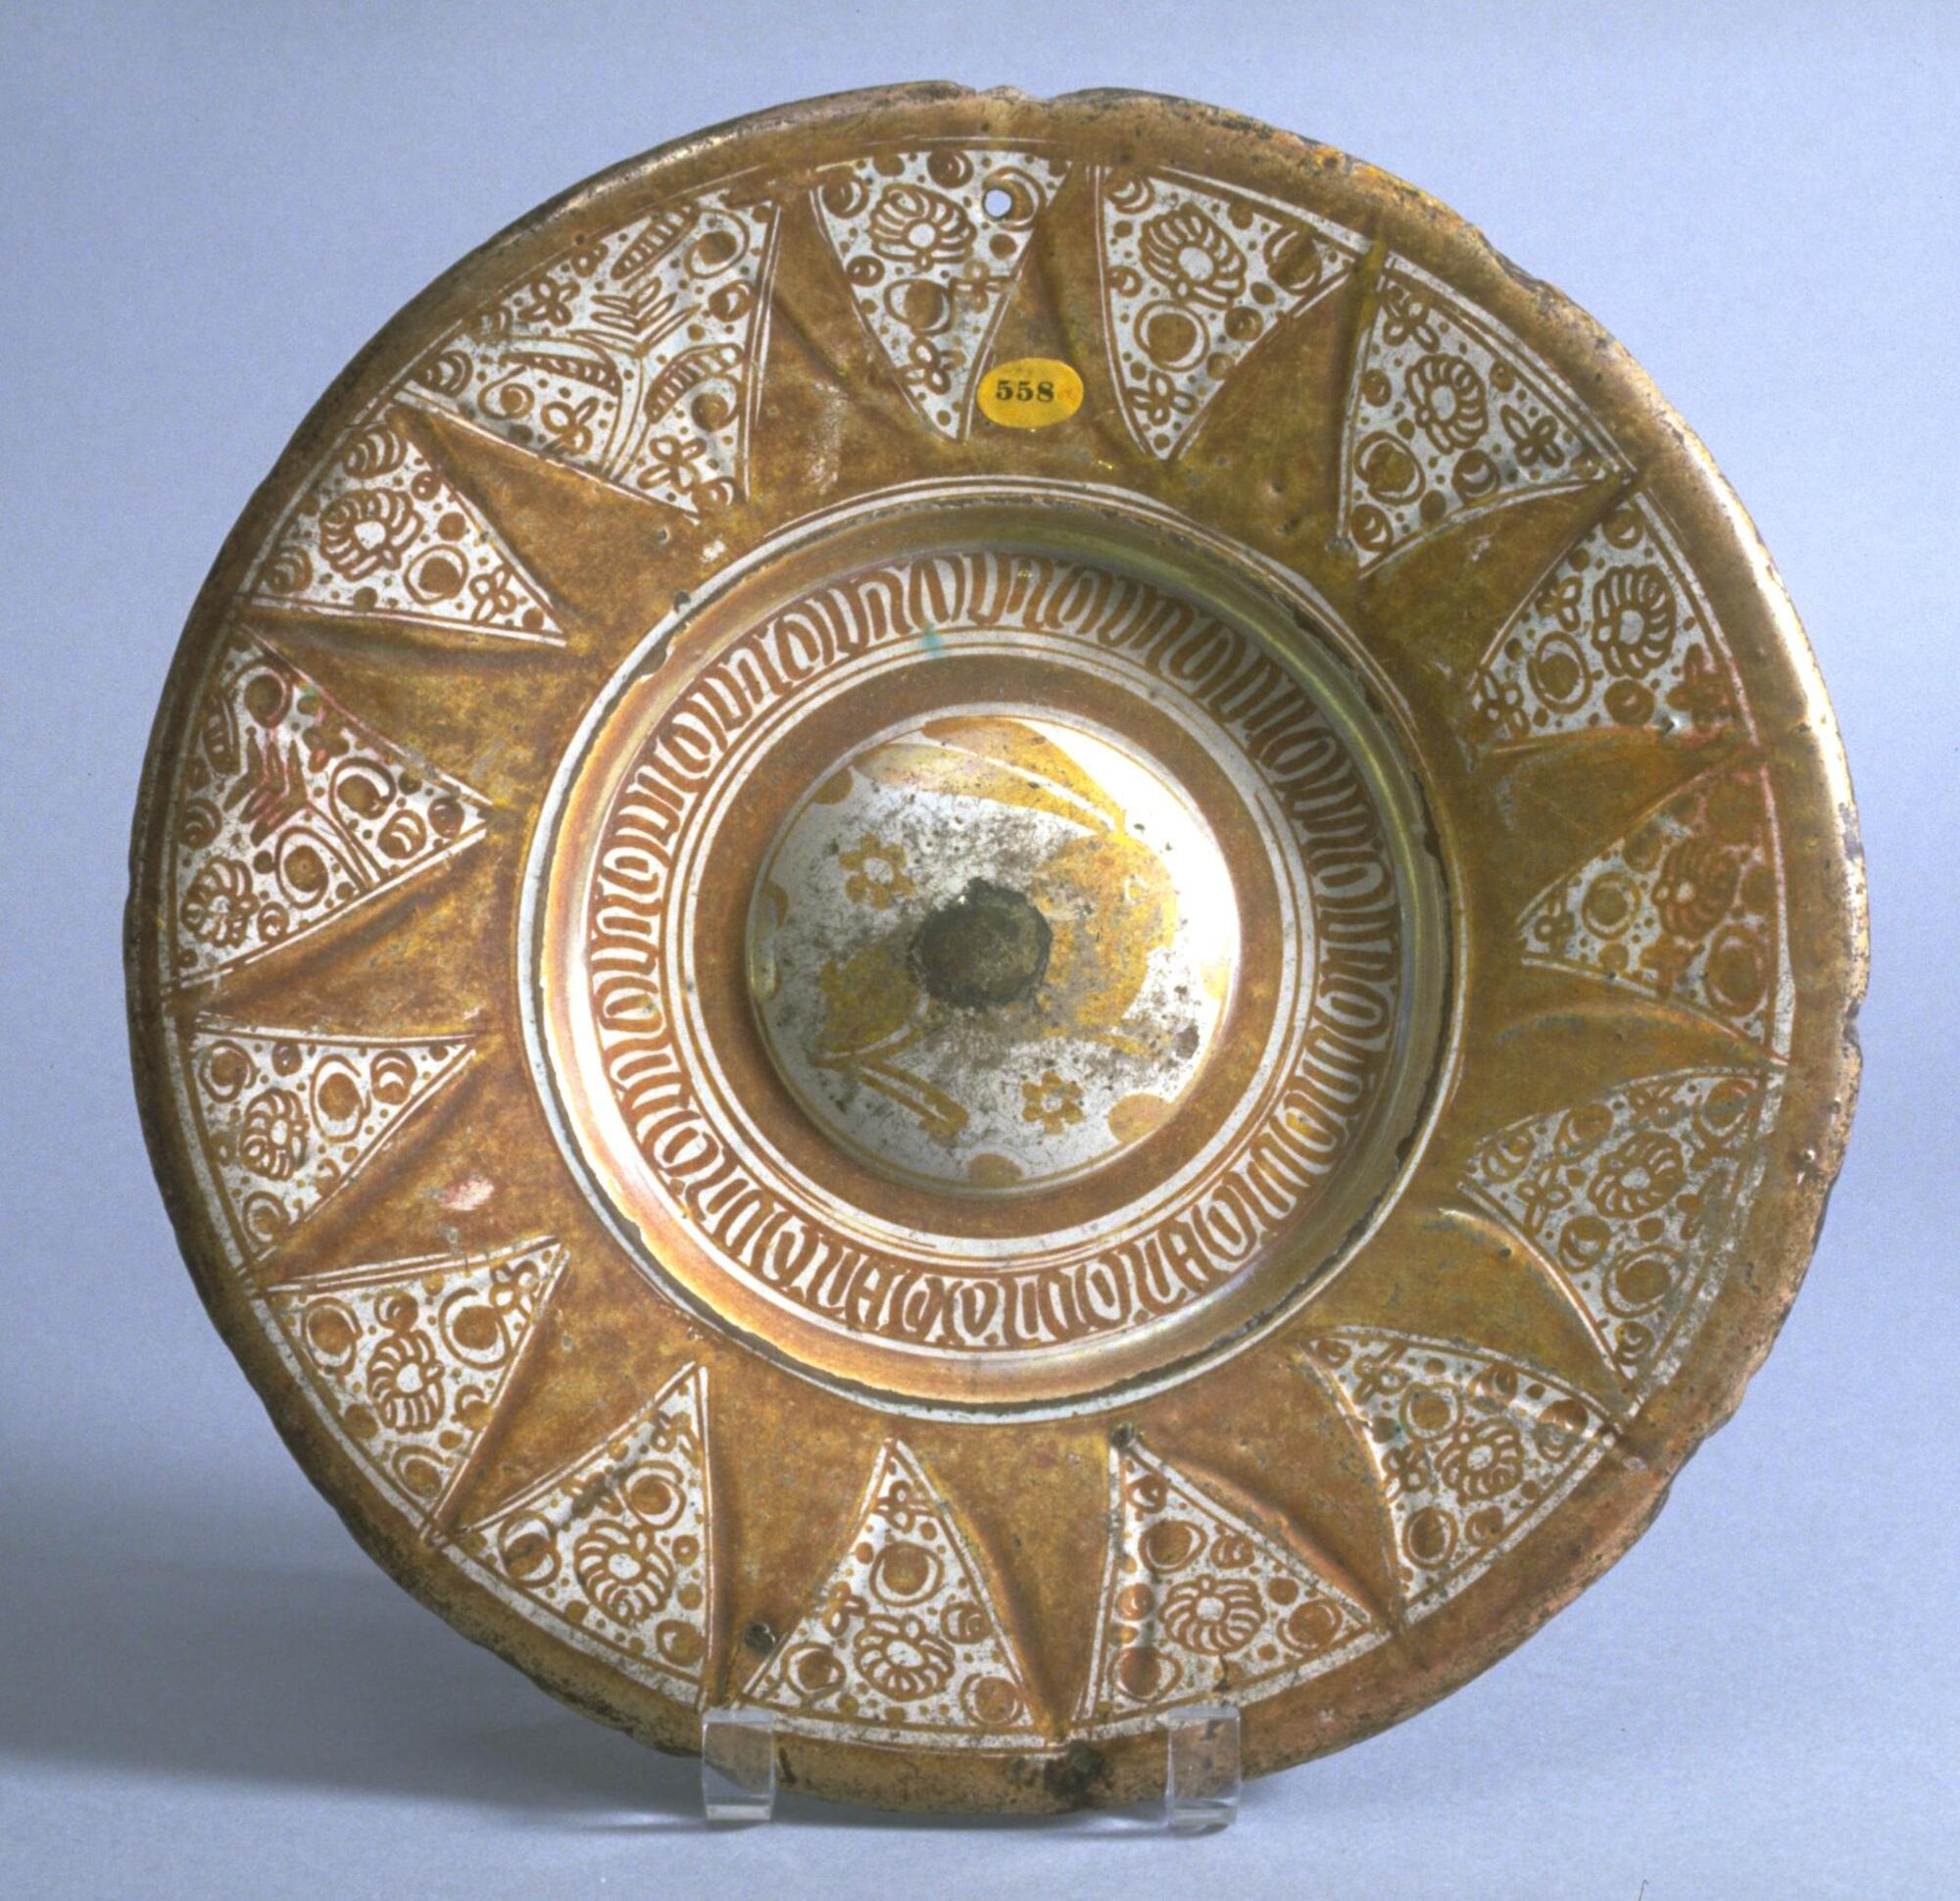 This dish features a three part structural division; the boss is almost flat. Around the depressed area is a band of degenerate Gothic [or pseudo-Arabic] script. On the brim are solid lustre painted zig-zags, possibly a late version of gadroons. The empty areas of this pattern are filled with dots and floral motifs. The reverse has repeated circles only.